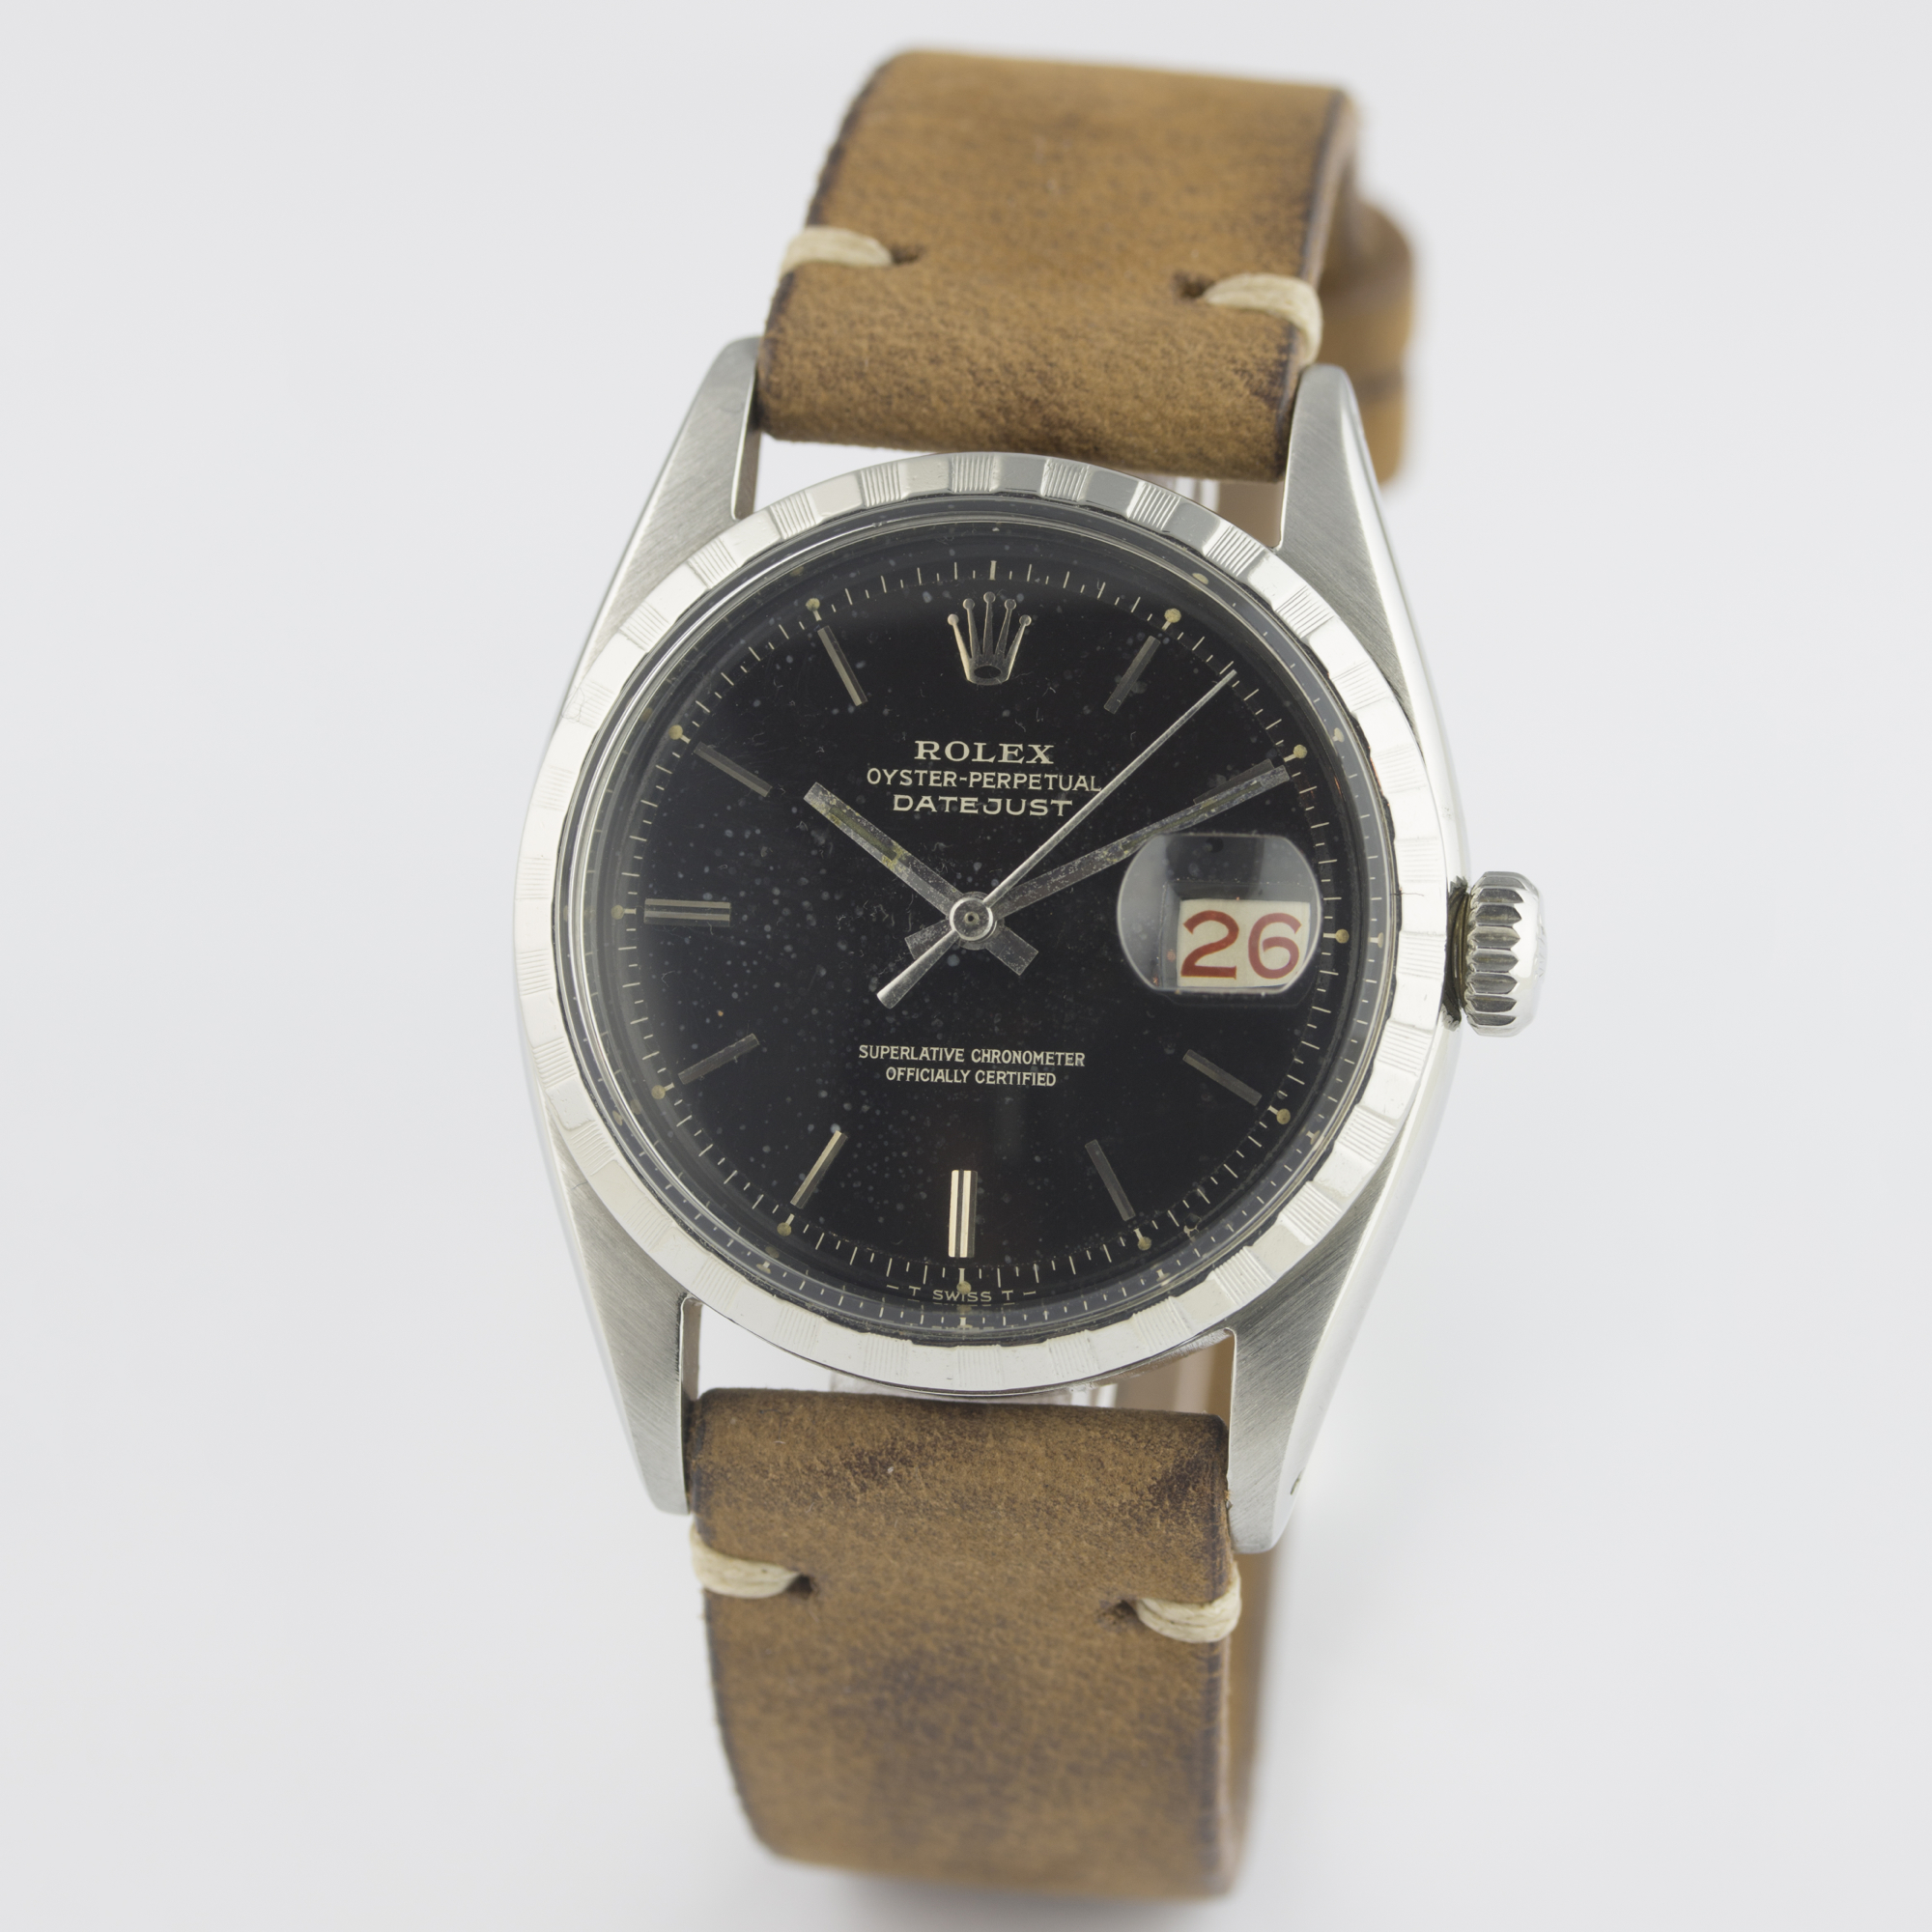 A RARE GENTLEMAN'S STAINLESS STEEL ROLEX OYSTER PERPETUAL DATEJUST WRIST WATCH CIRCA 1960, REF. 6605 - Image 3 of 9